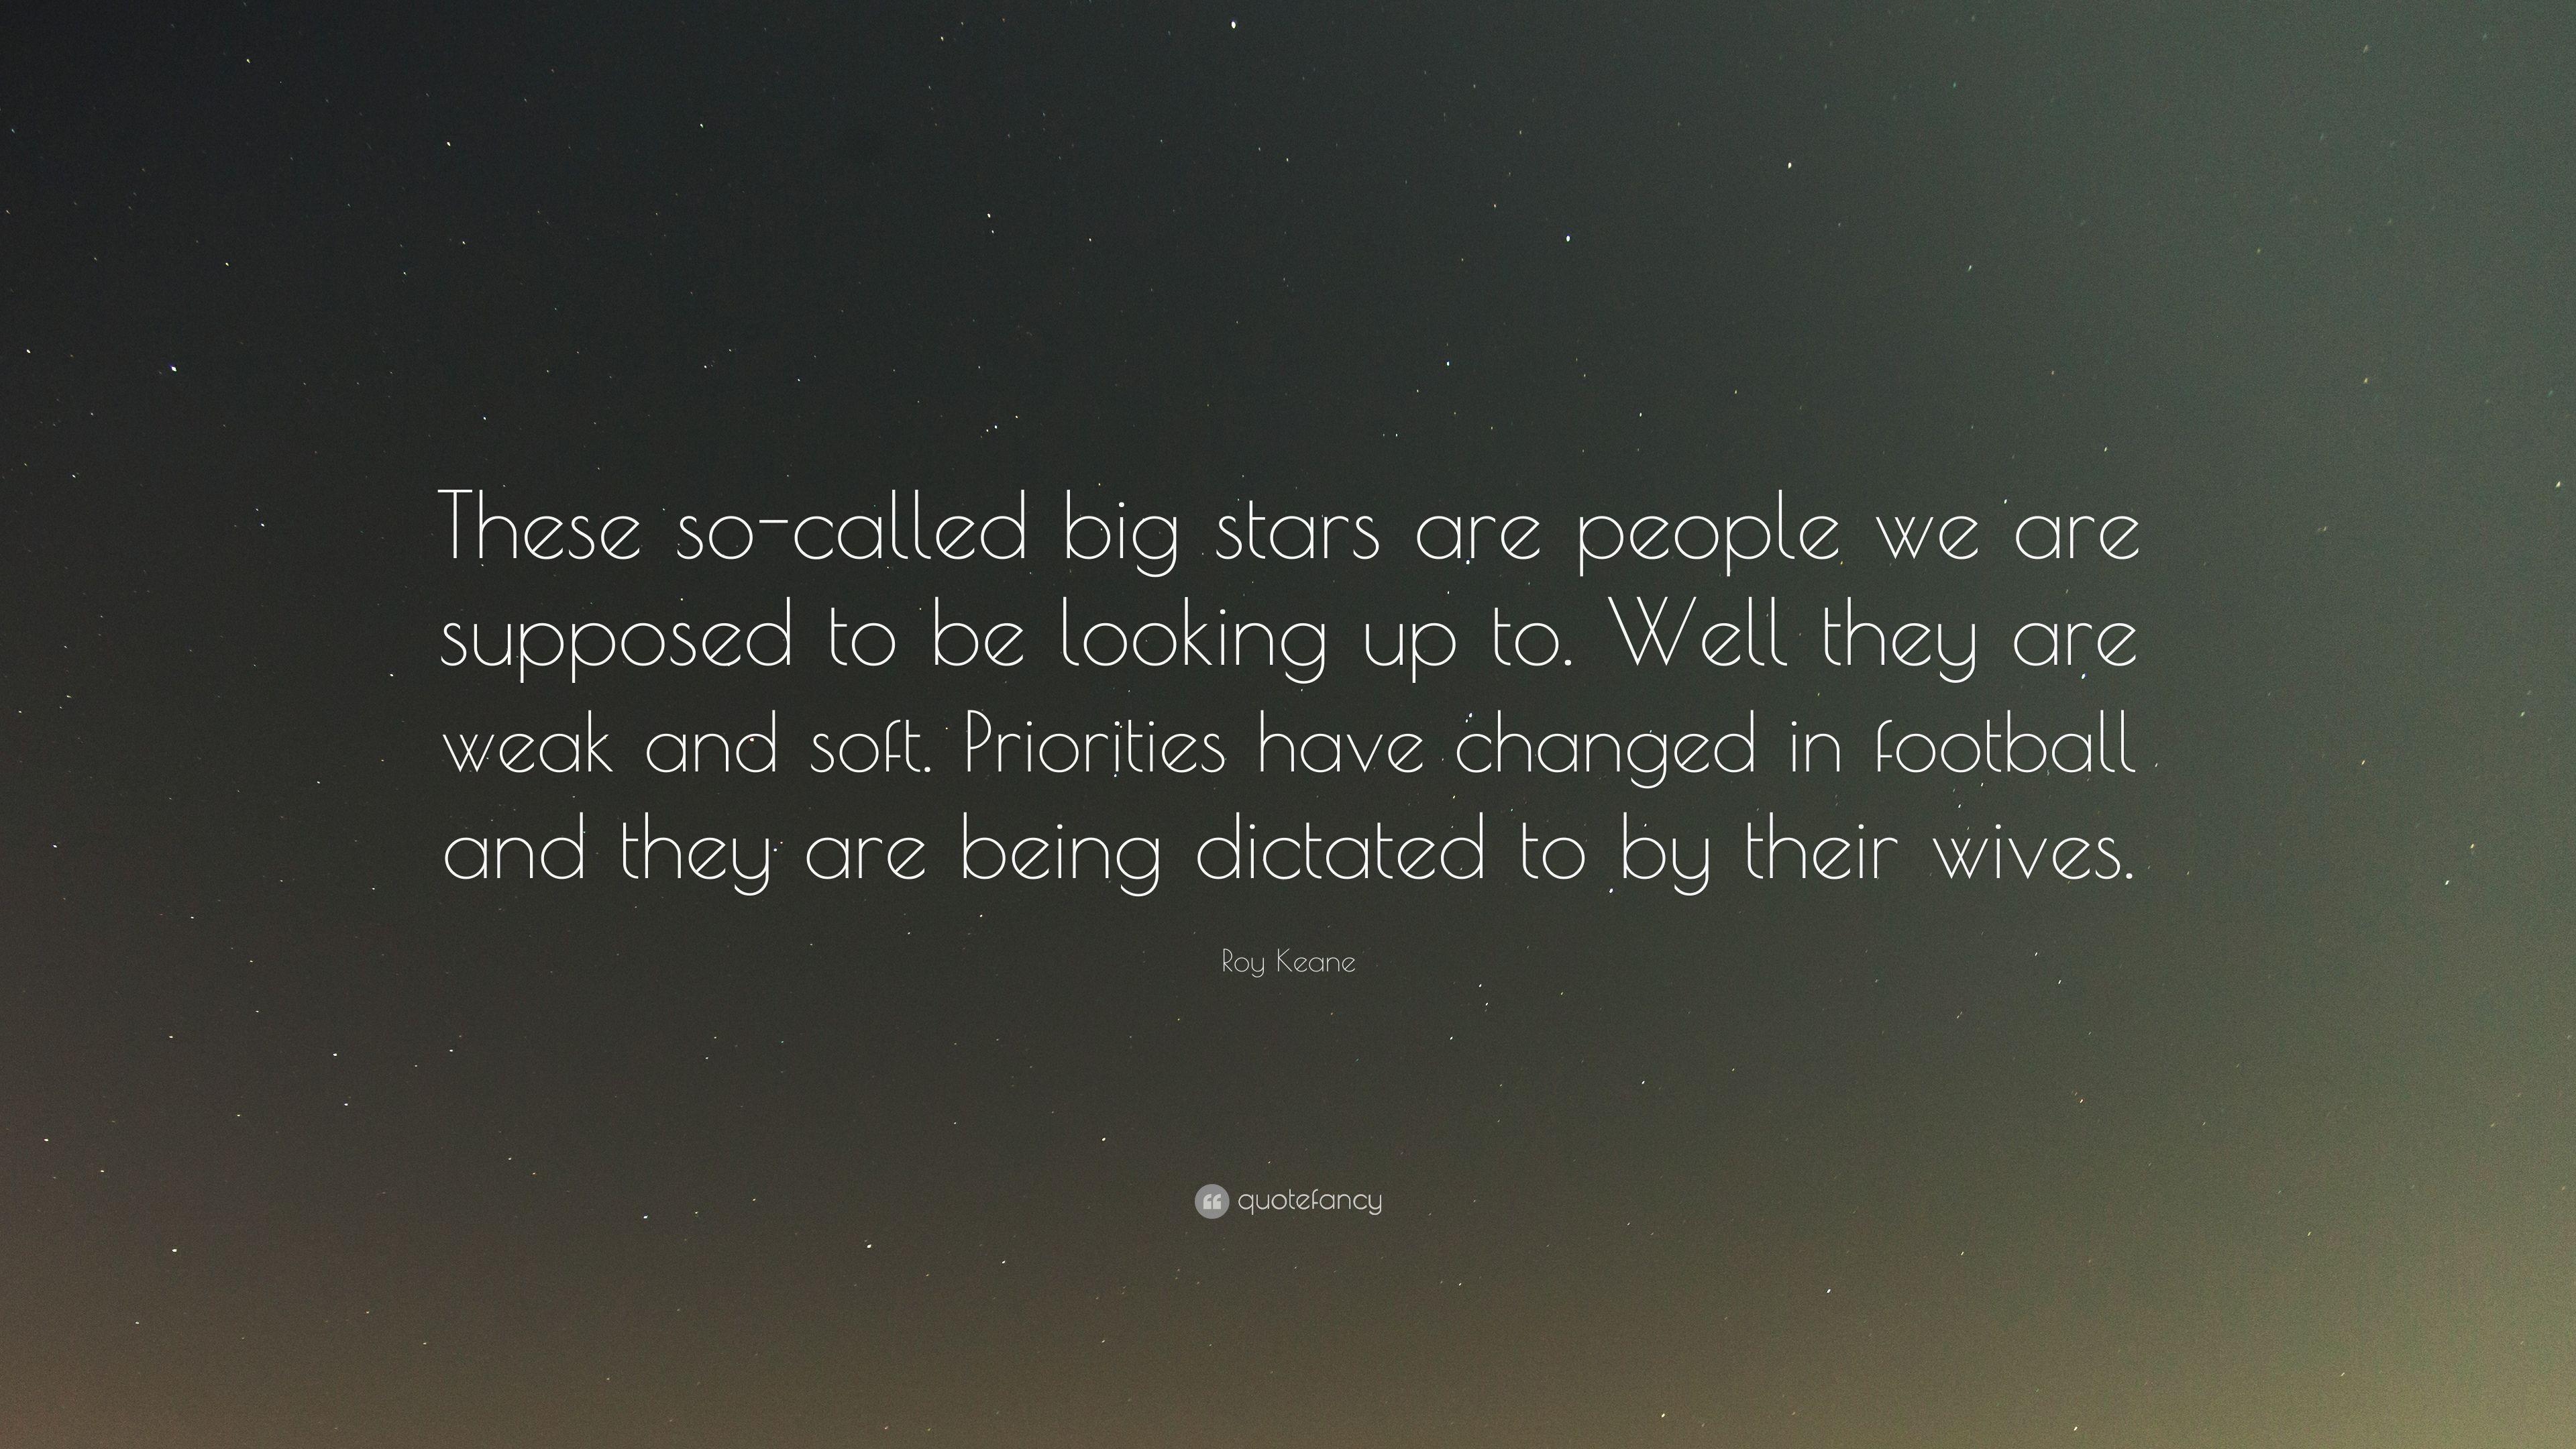 Roy Keane Quote: “These So Called Big Stars Are People We Are